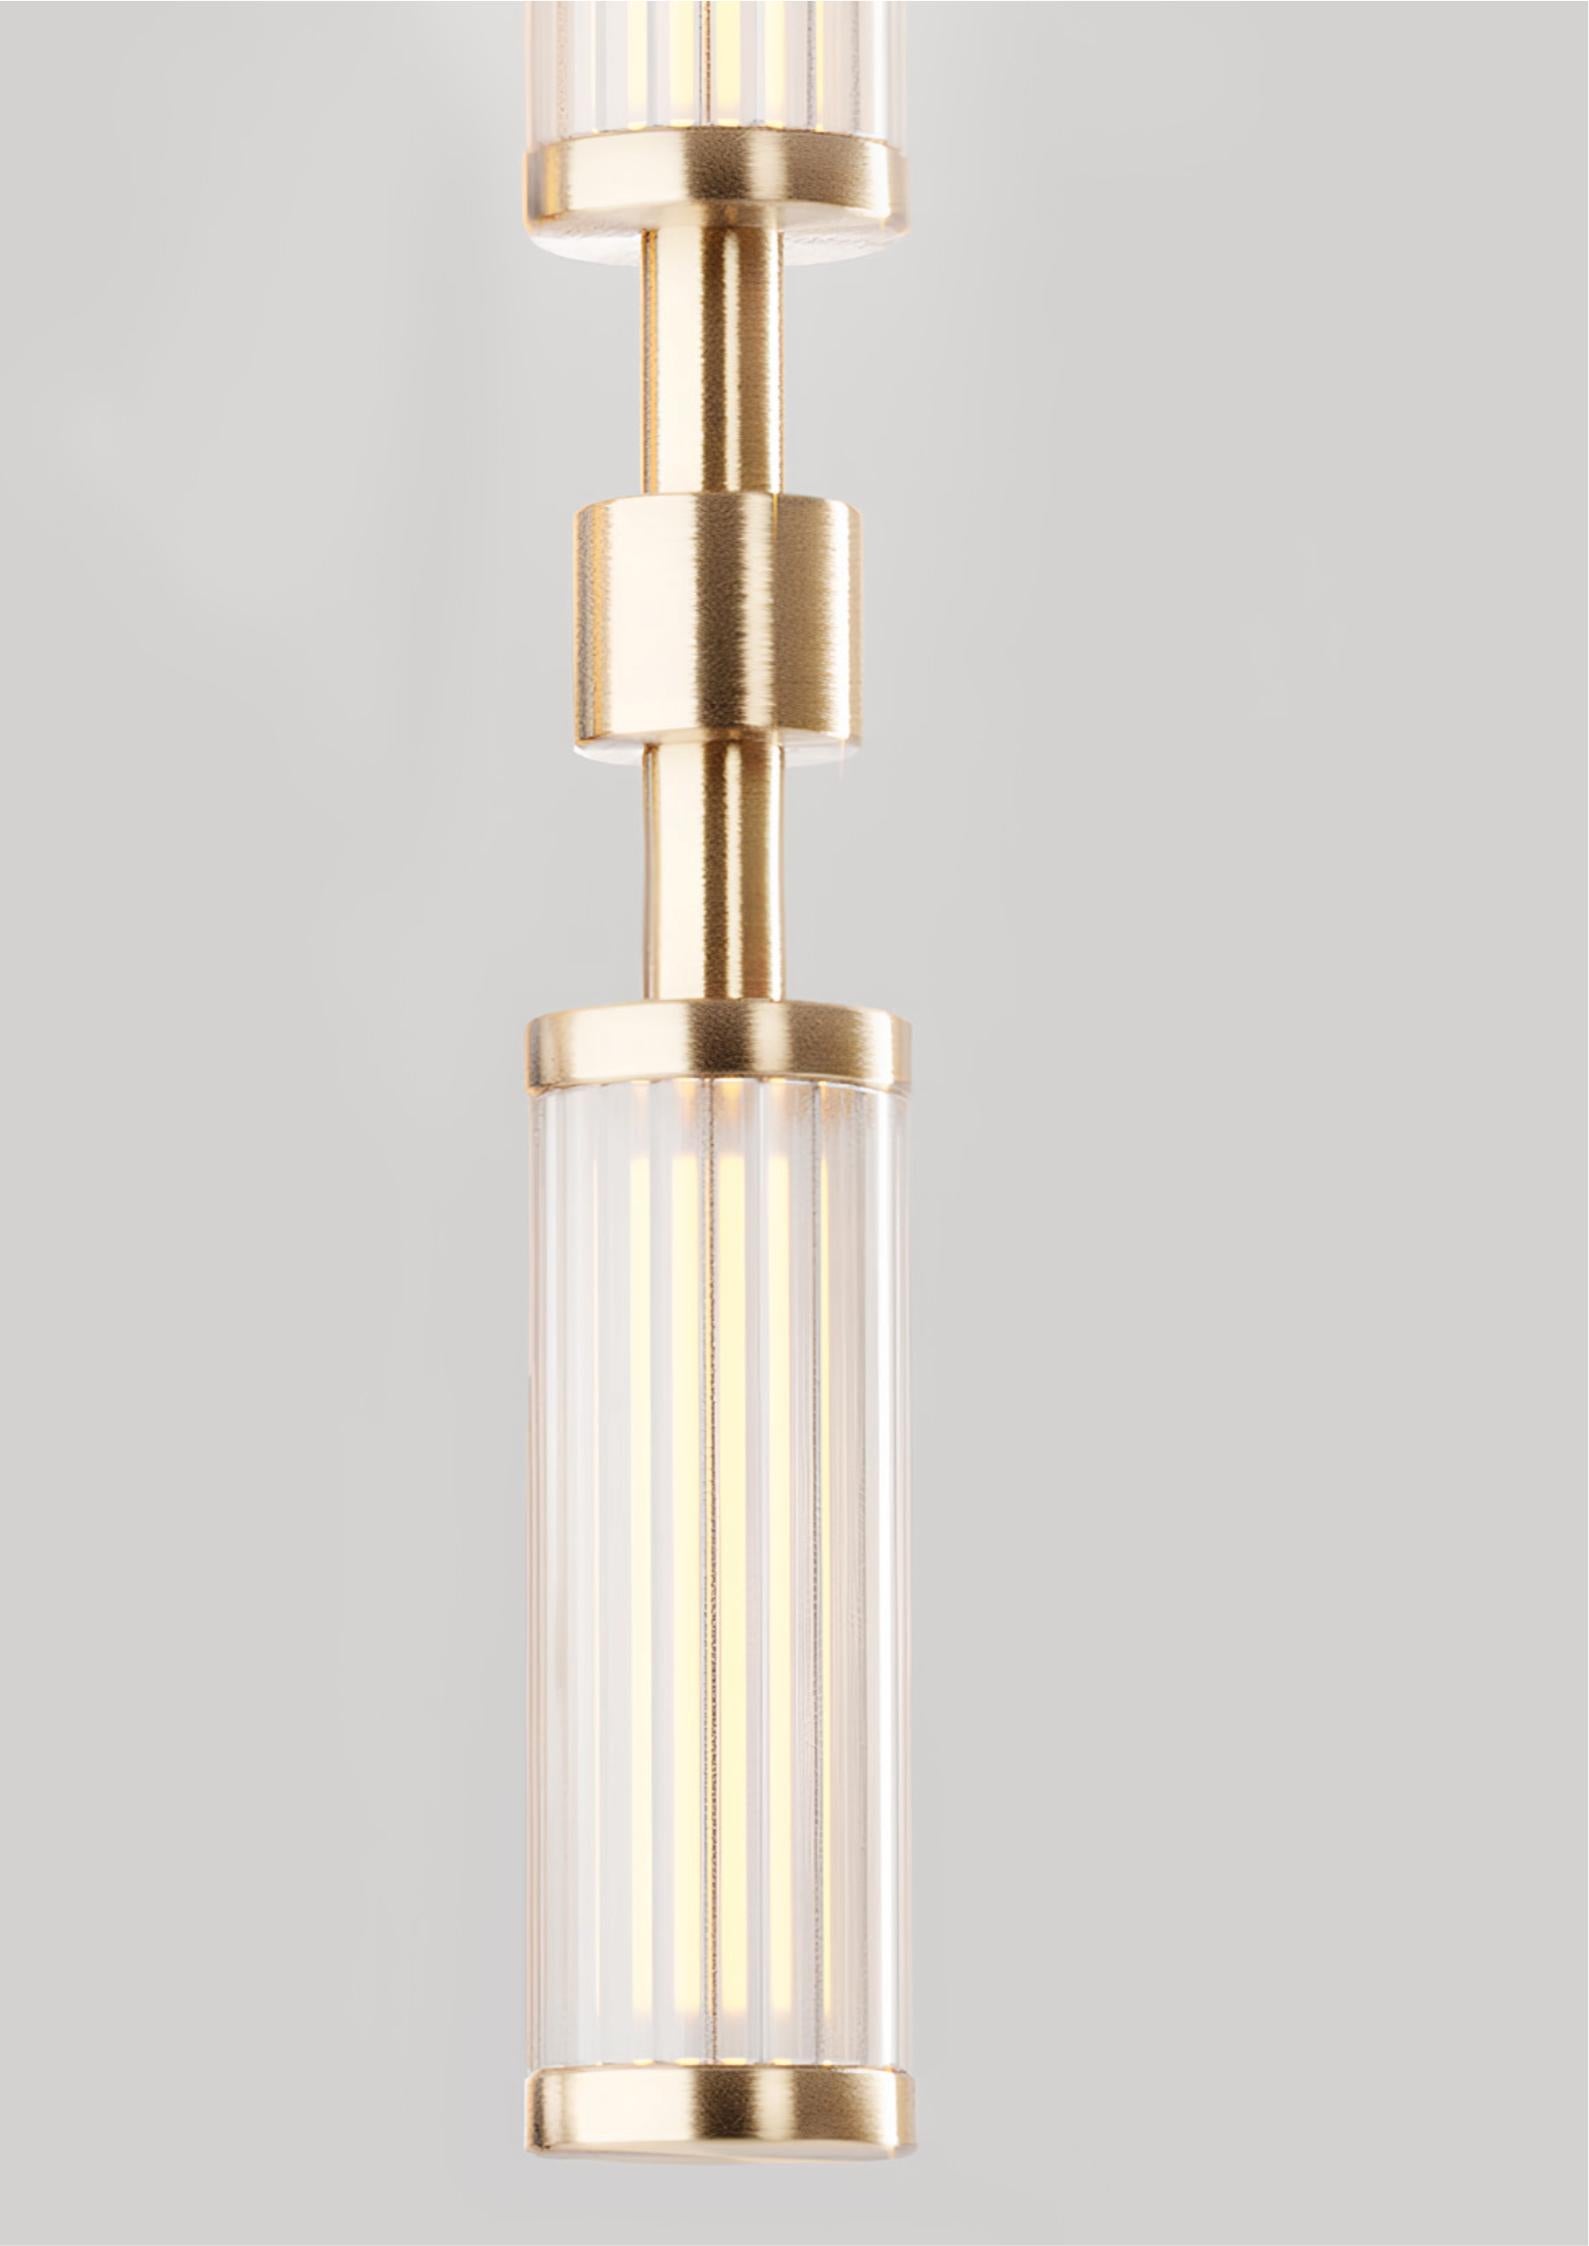 The Babylone ceiling lamps are a sculptural, majestic piece. Thanks to the vertical proportions and the exquisite refinement of brass and marble, they captivate attention from every vantage poin. Emitting a diffused, crystal-clear light, they